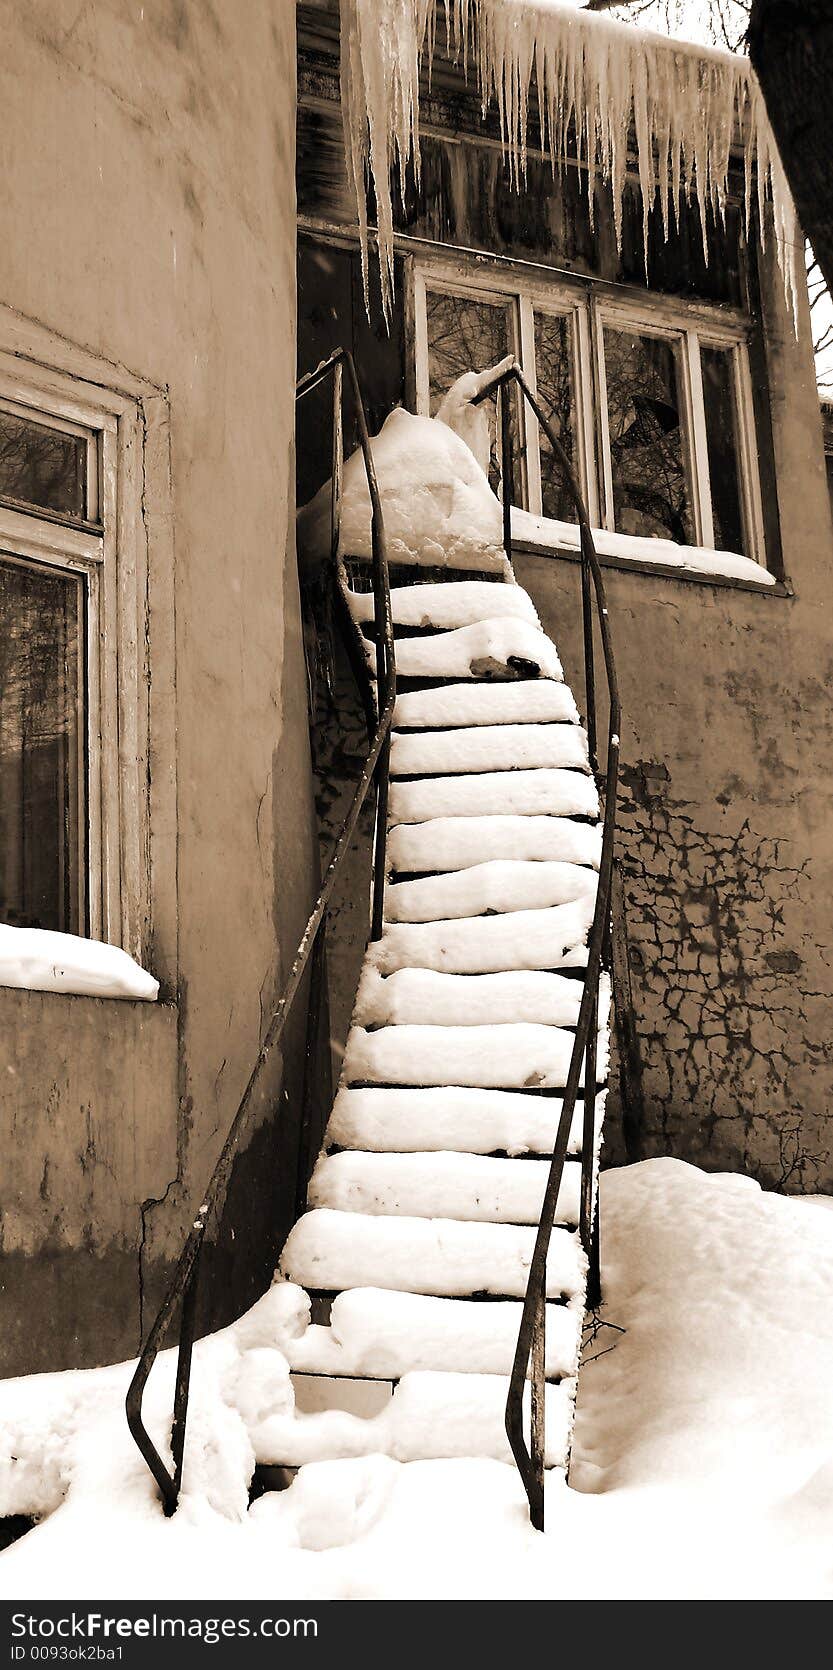 Old building. Sepia. Stairs. Winter. Old building. Sepia. Stairs. Winter.